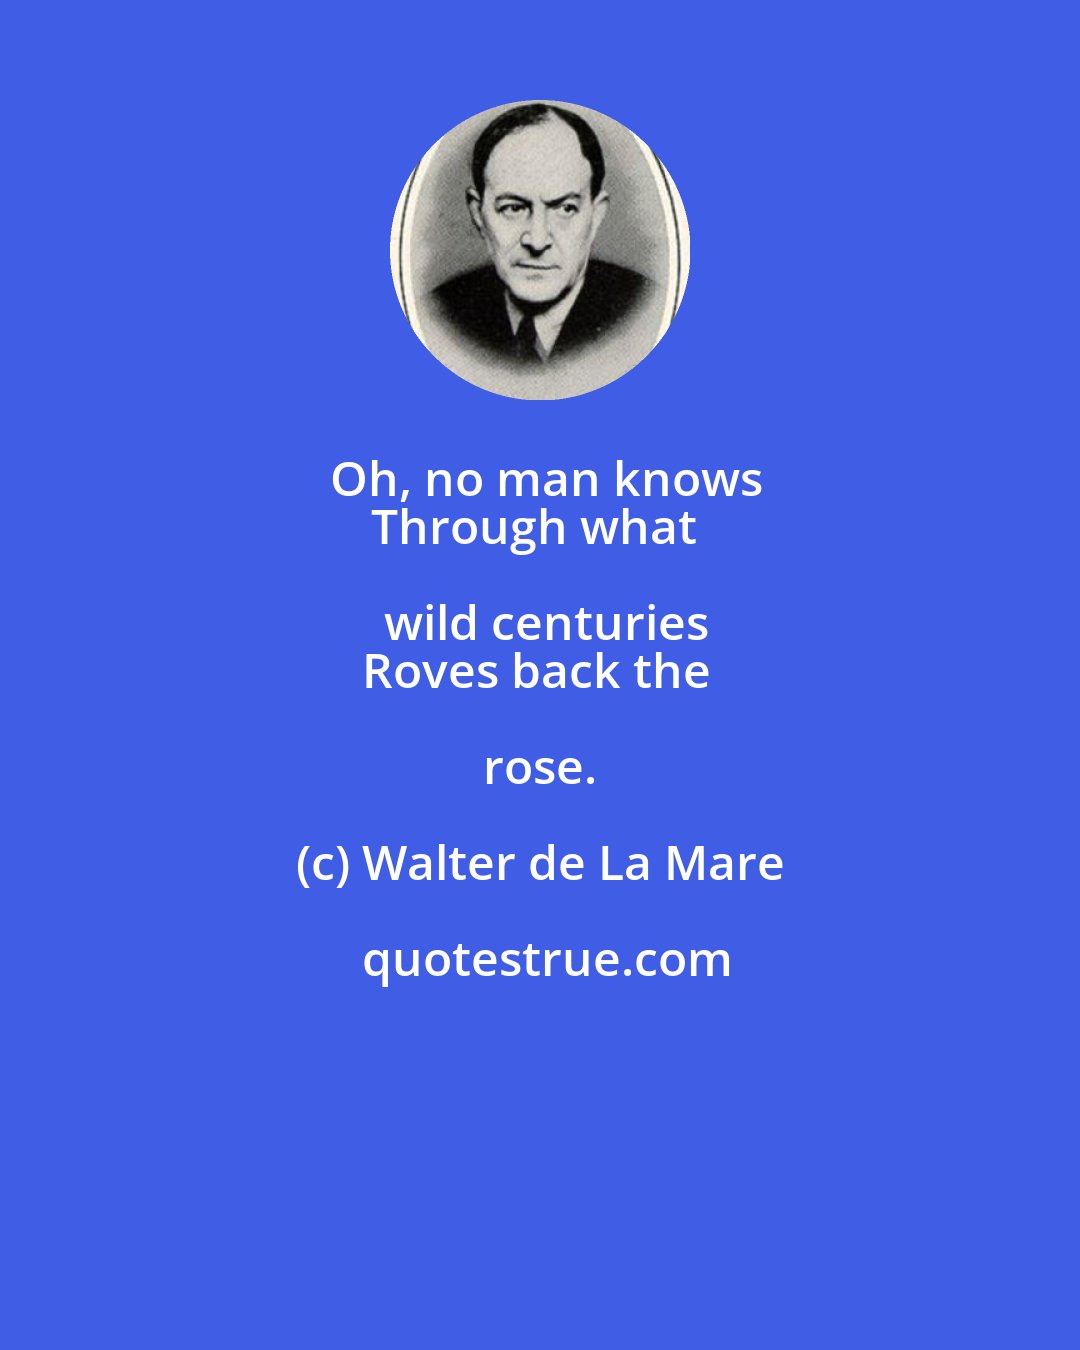 Walter de La Mare: Oh, no man knows
Through what wild centuries
Roves back the rose.